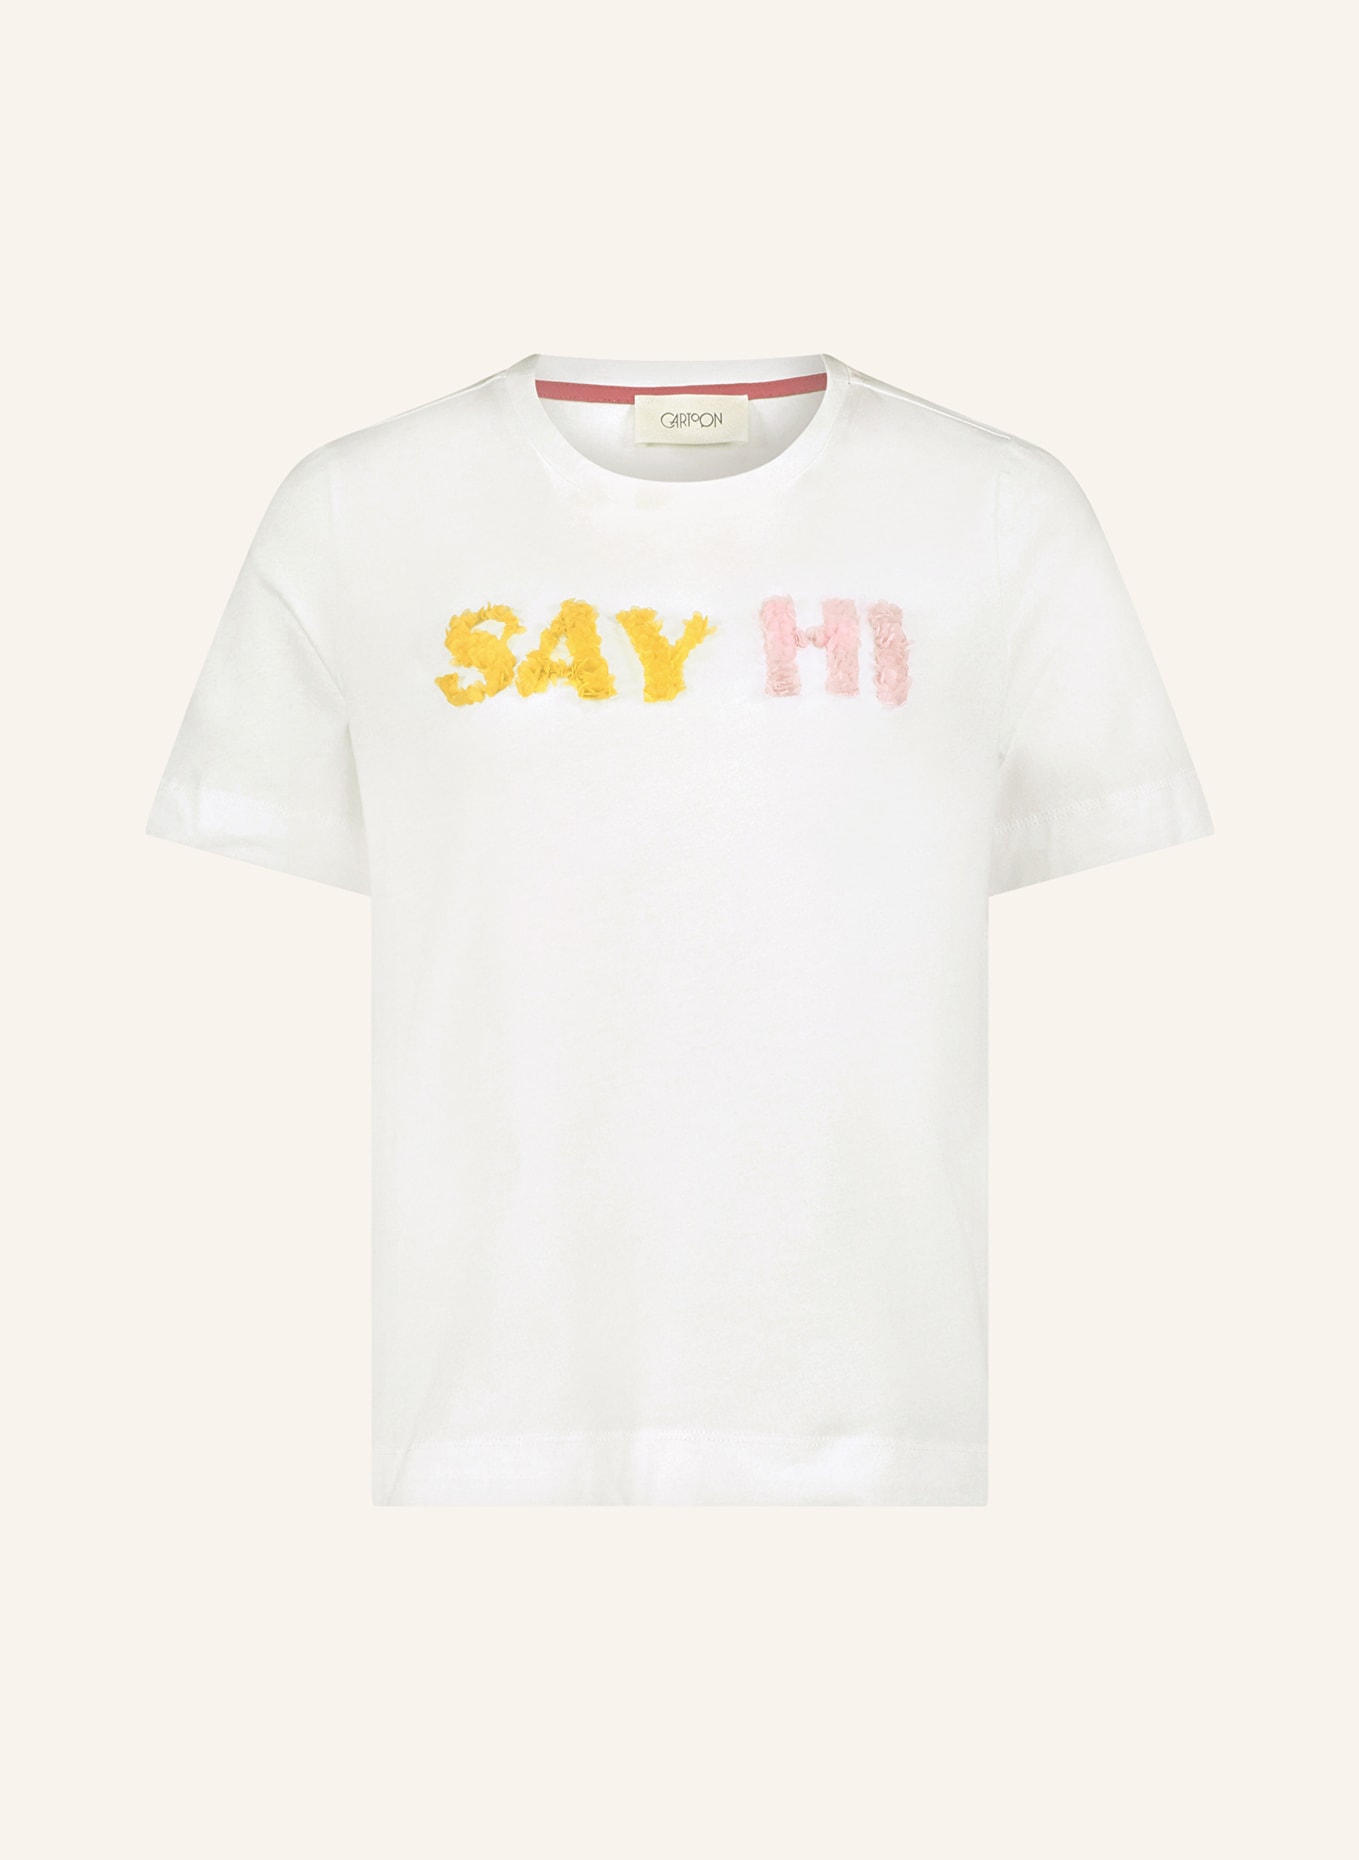 CARTOON T-shirt, Color: WHITE/ YELLOW/ PINK (Image 1)